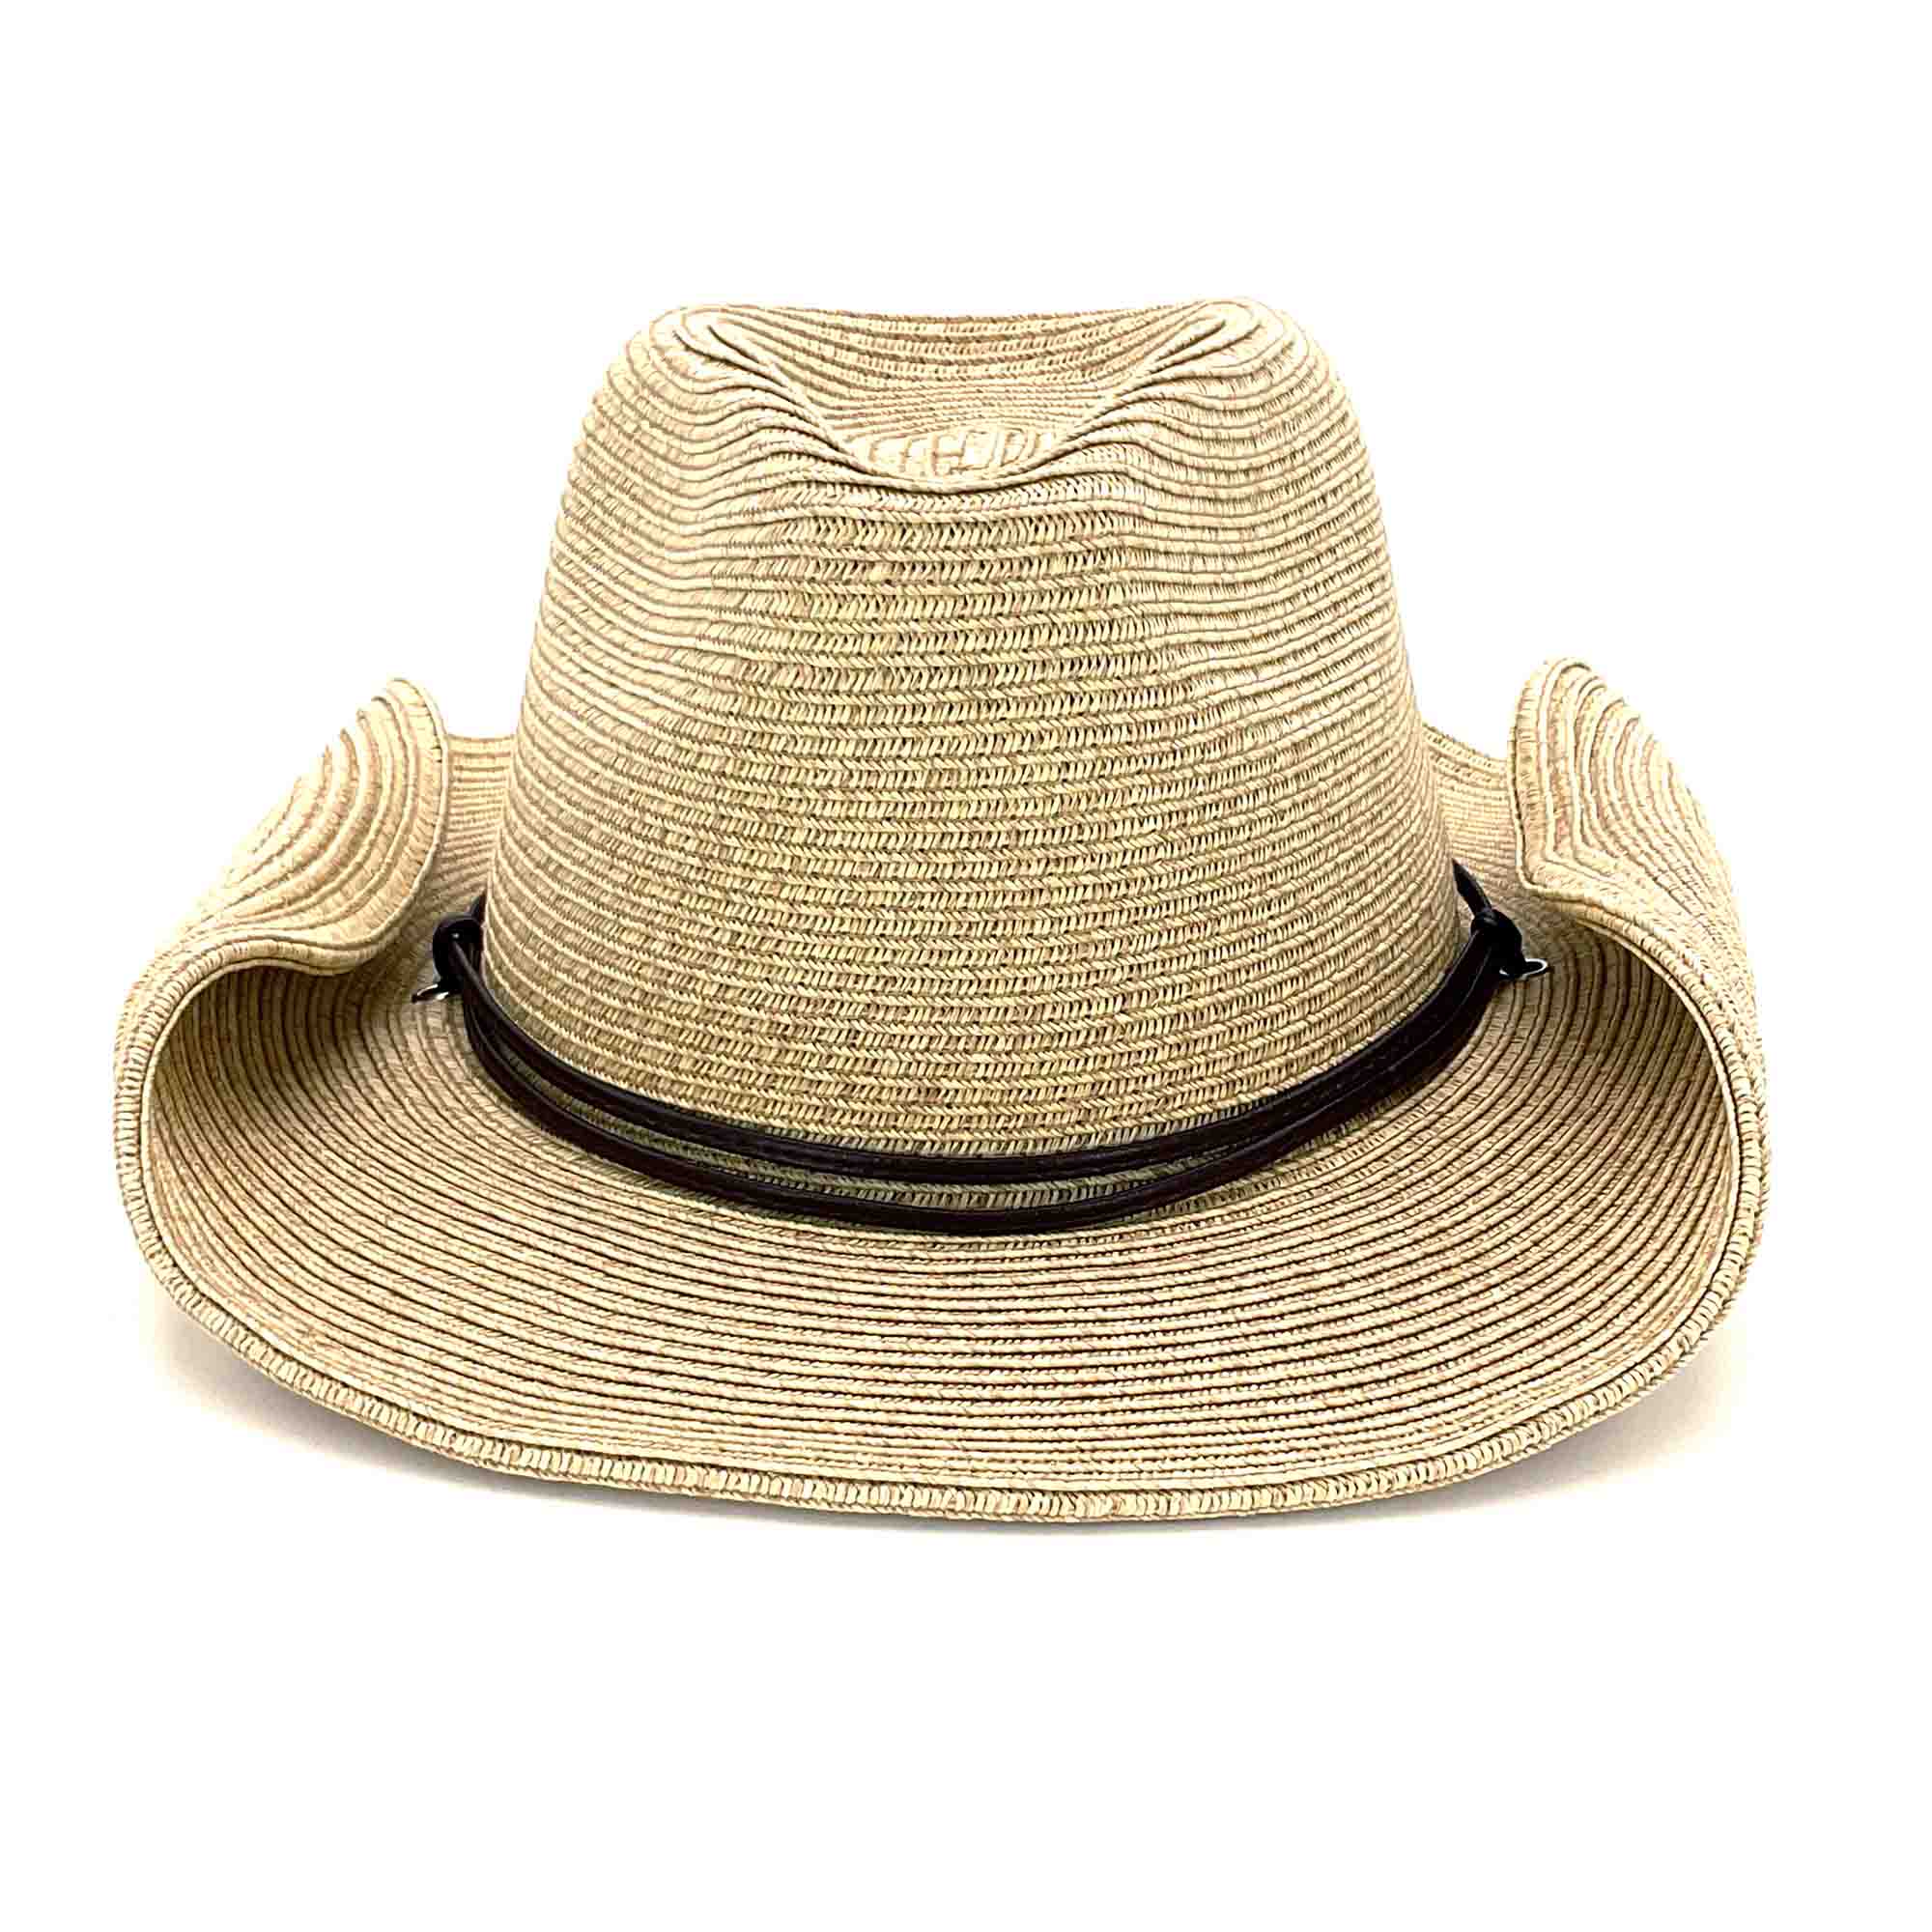 Petite Size Straw Cowboy Hat with Chin Cord - Boardwalk Style